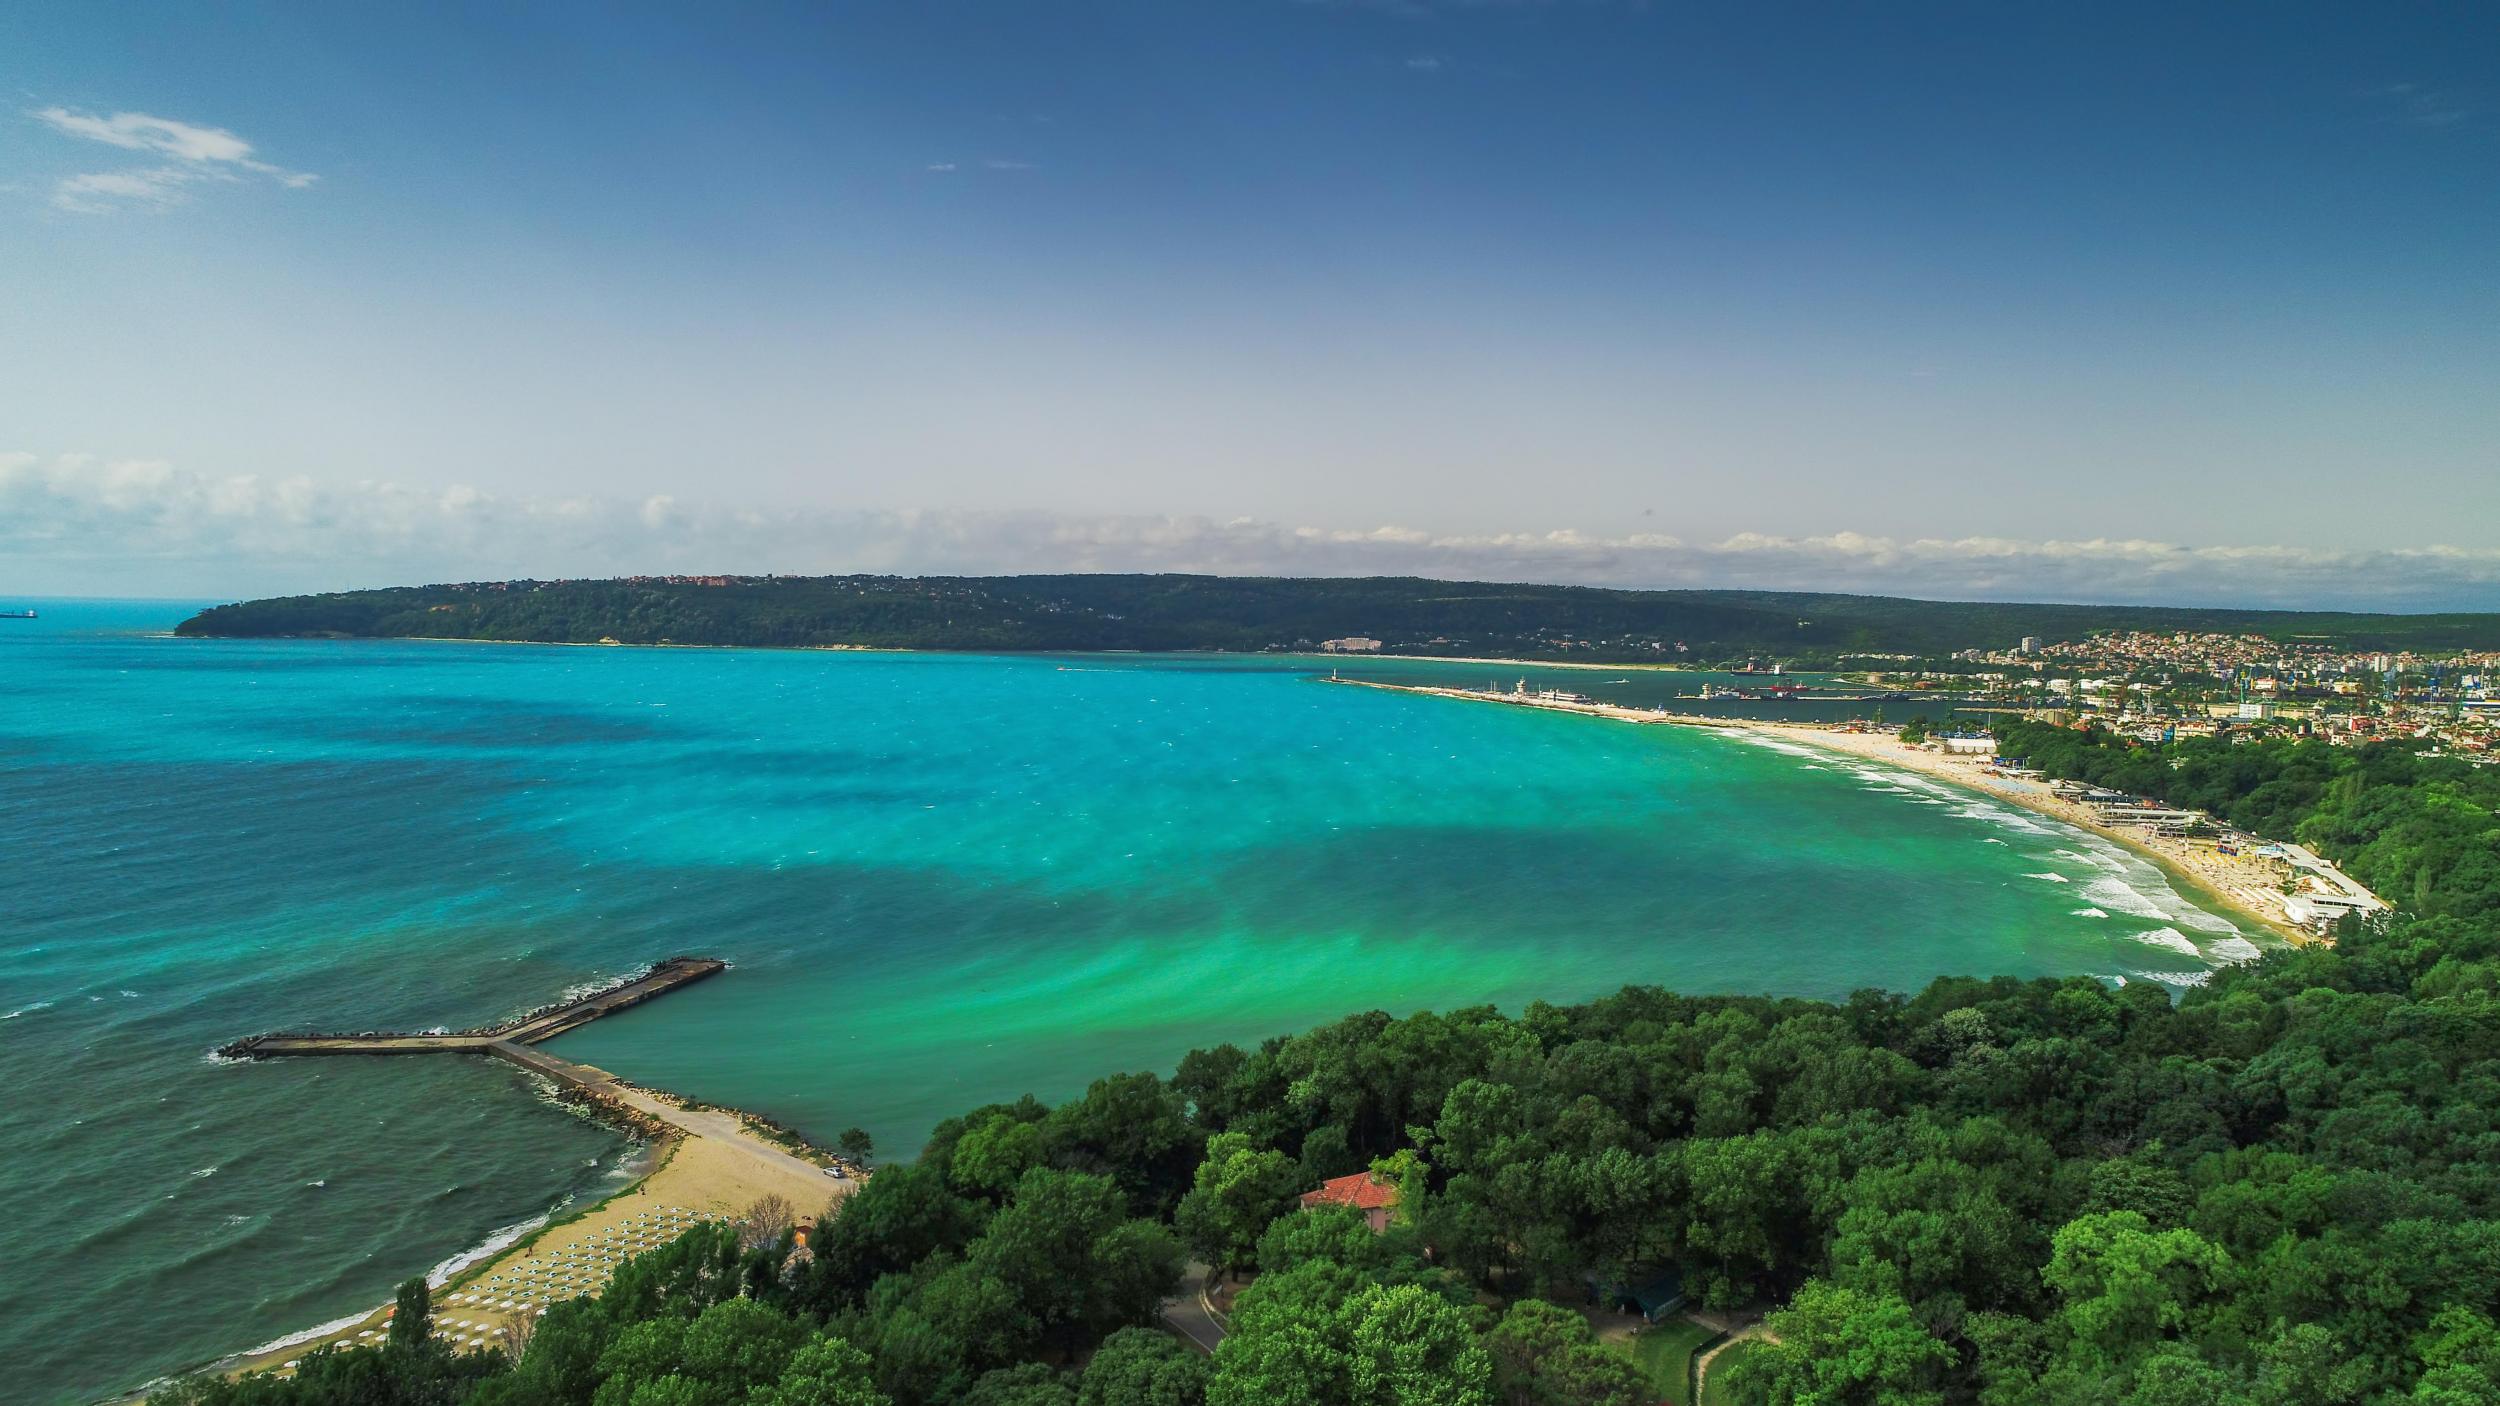 A stay in green-list Bulgaria would reduce compulsory fees and double as a great holiday